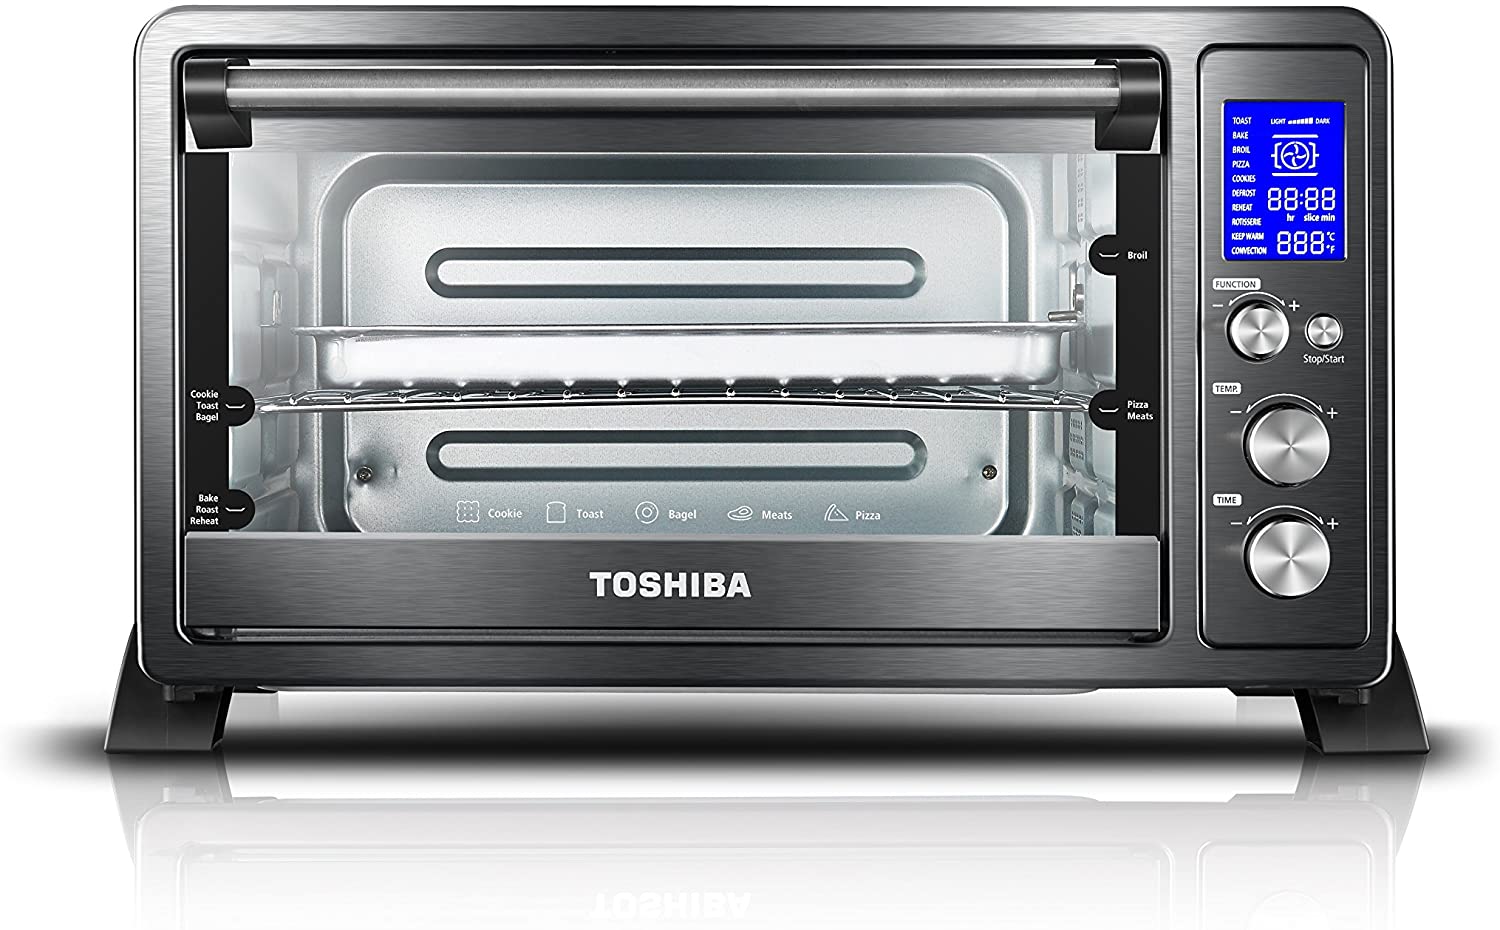 Toshiba AC25CEW-BS Review - 1500W Toaster Oven